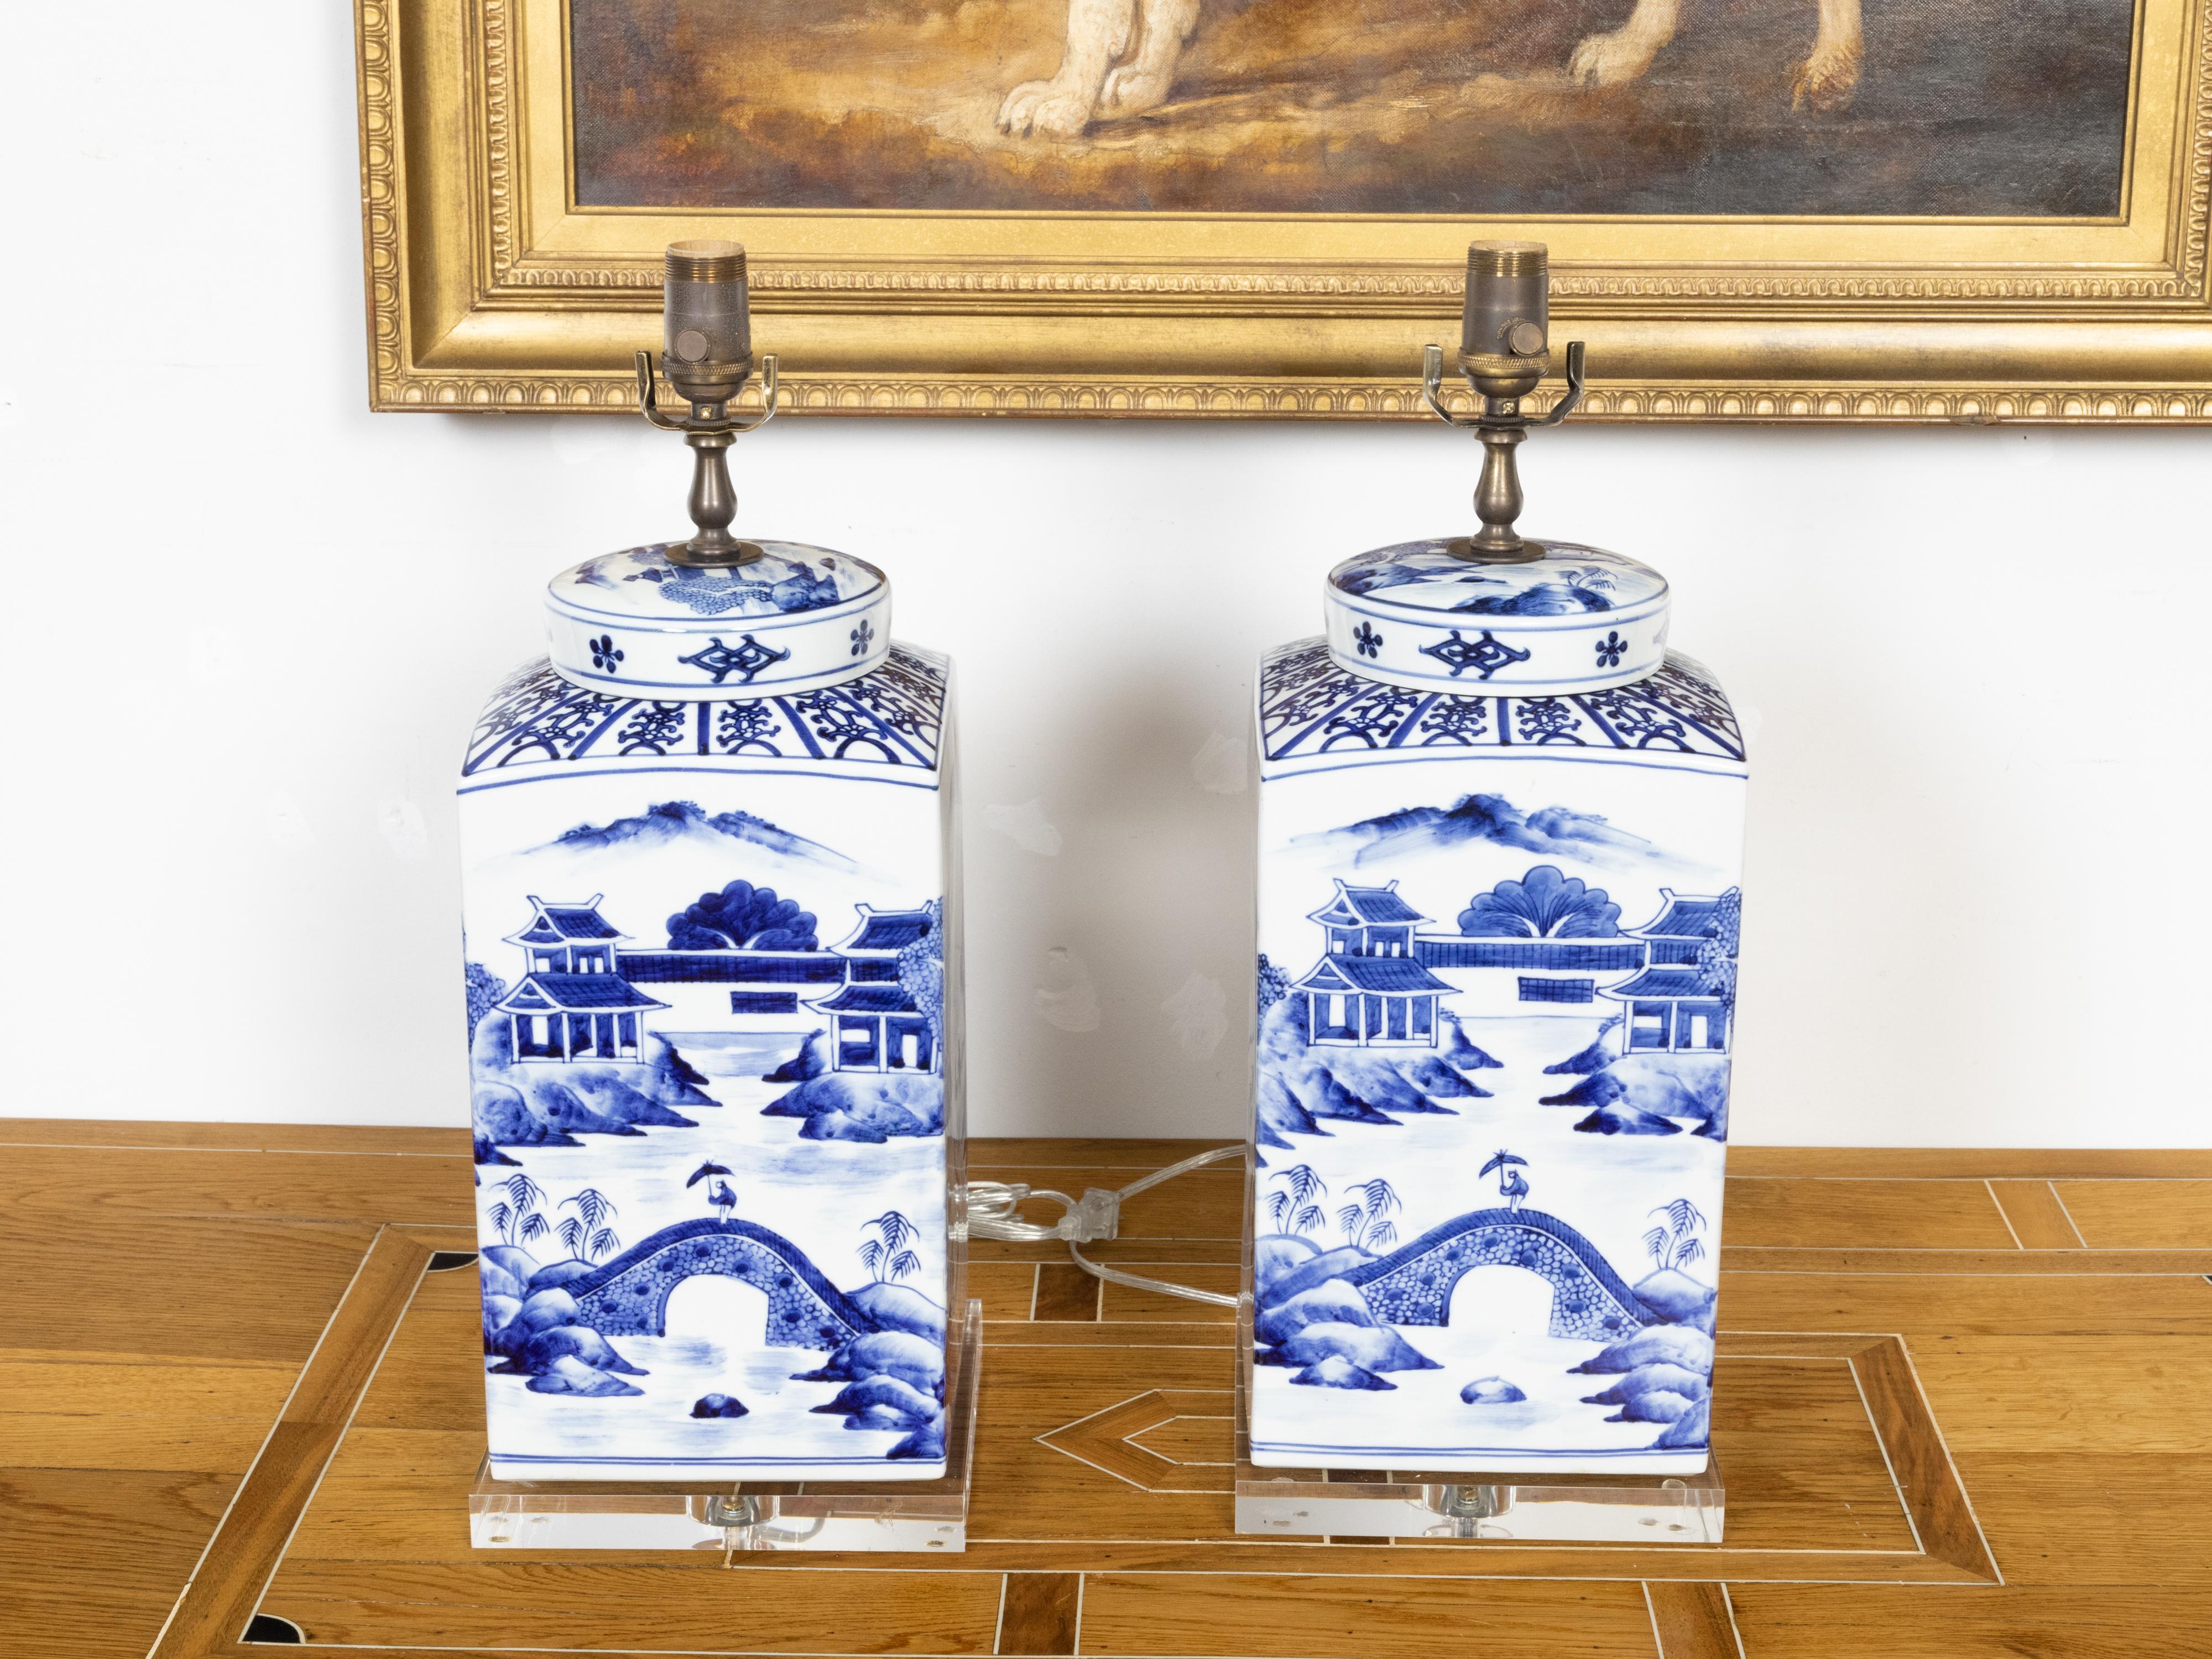 A pair of Chinese Export blue and white porcelain jars with hand-painted Pagoda landscape scenes and newly mounted as table lamps on lucite bases. Created in China each of this pair of porcelain jars features a blue and white décor showcasing